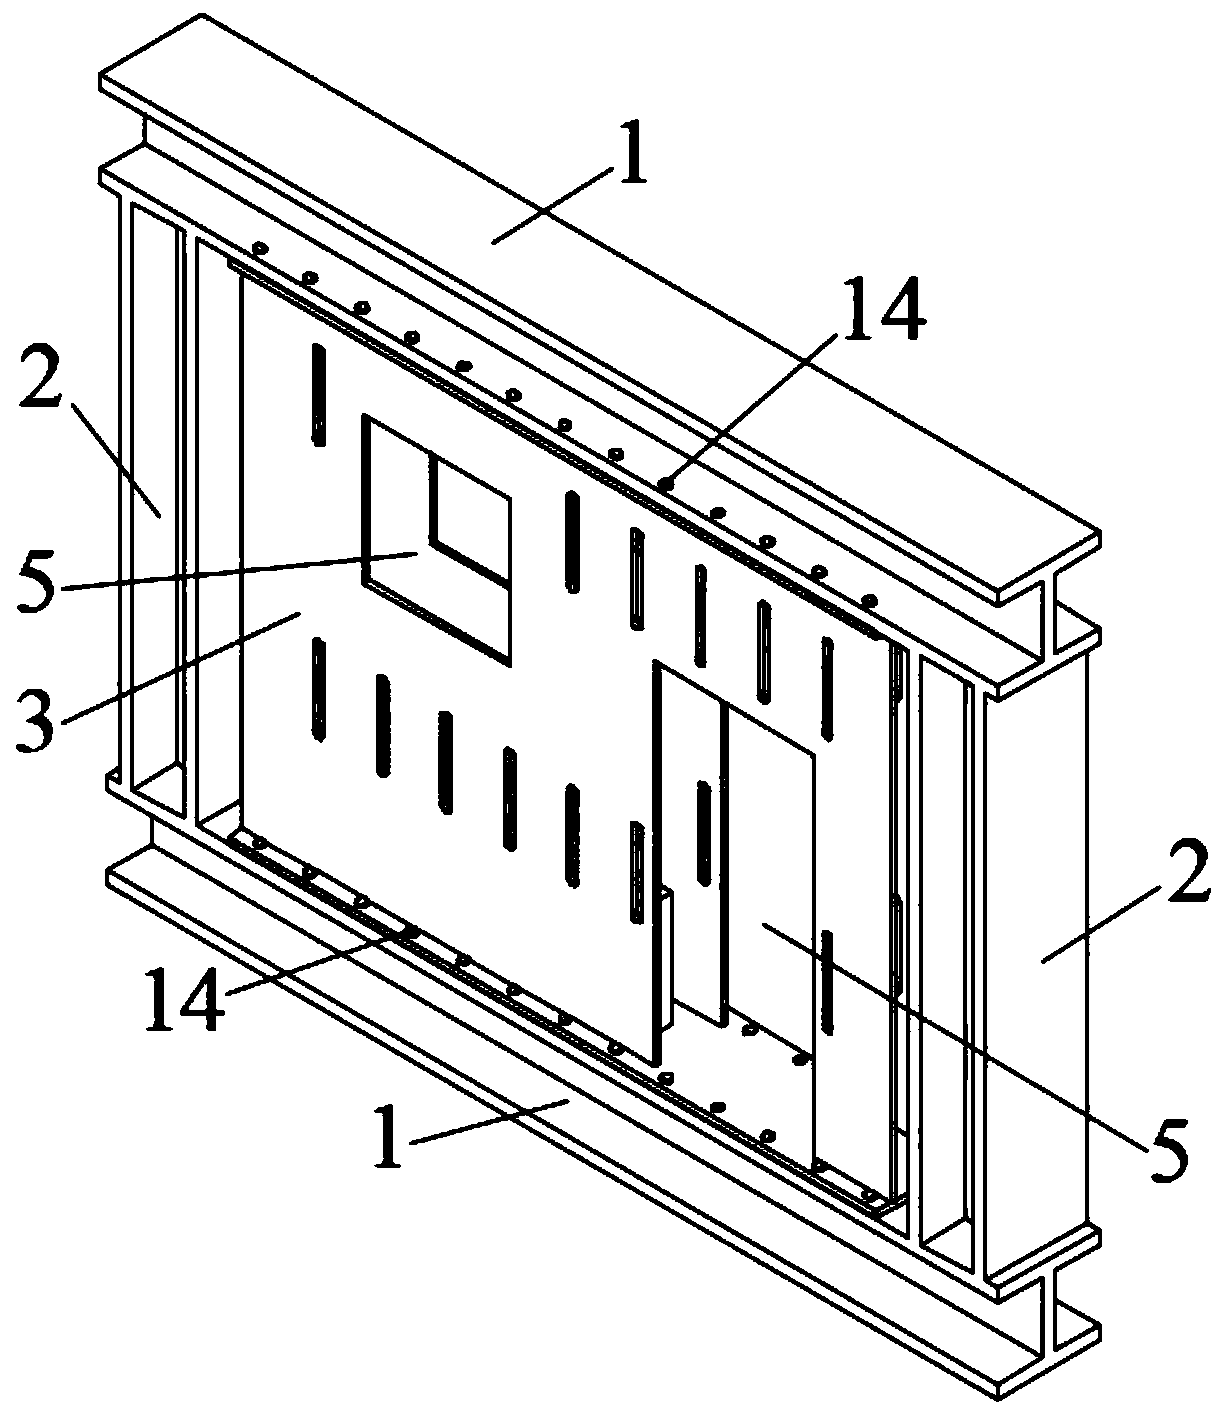 Prefabricated composite energy-dissipated steel beam and column structure with multi-stage damping and secondary amplification of displacement